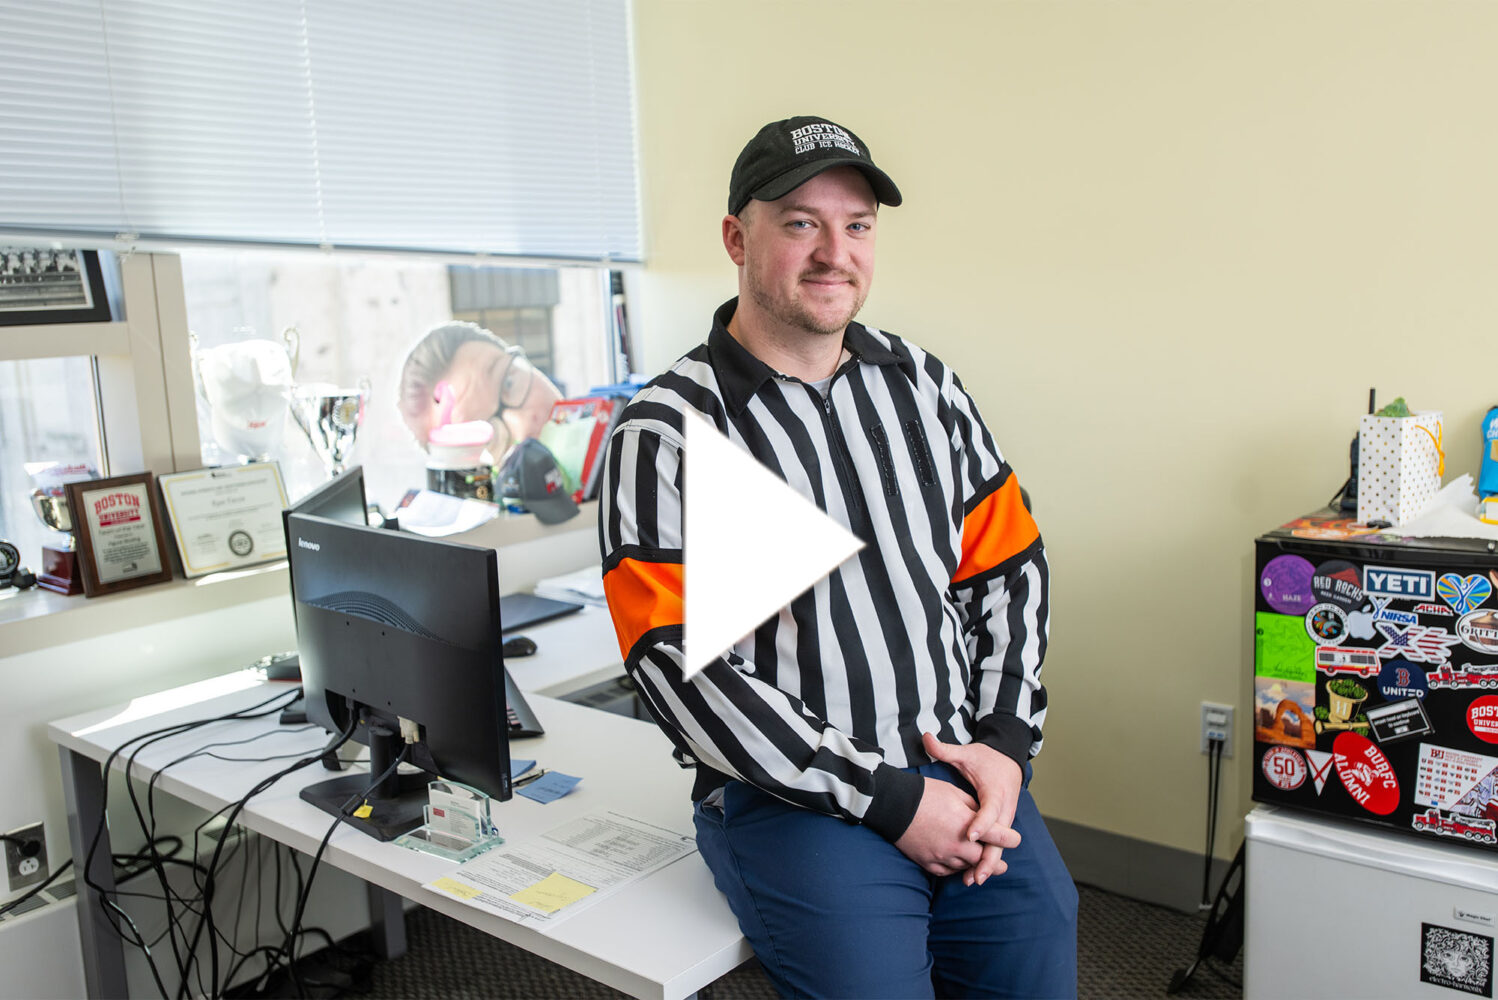 Photo: A man in a referee outfit with a hat and a long-sleeved shirt with vertical black and white stripes. There is a white play button in the center of the image